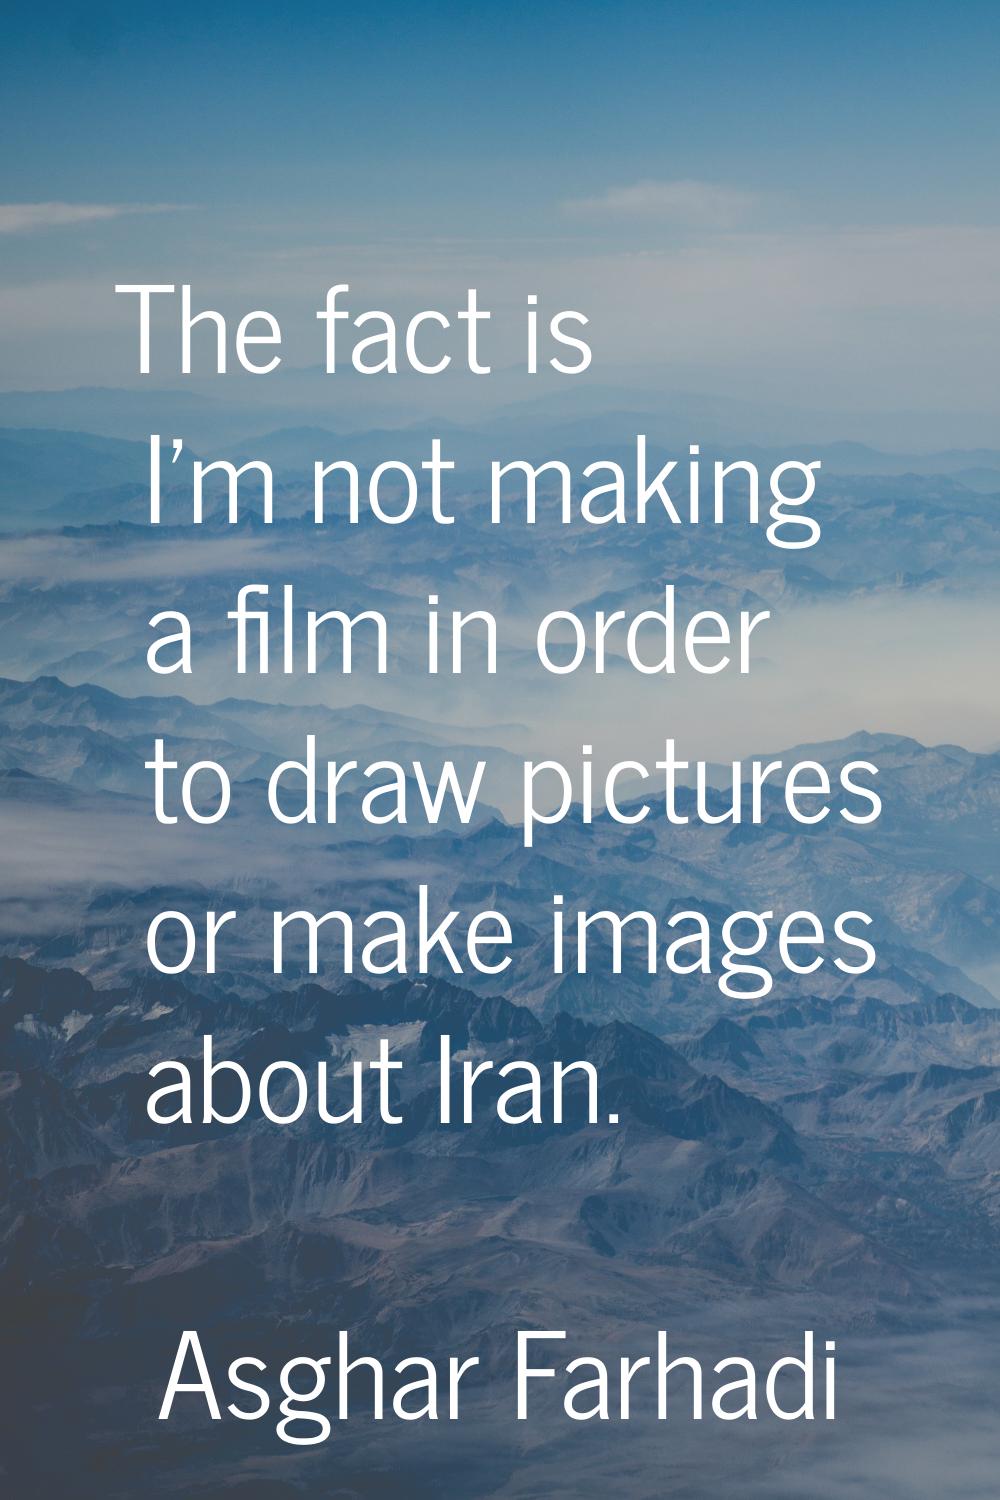 The fact is I'm not making a film in order to draw pictures or make images about Iran.